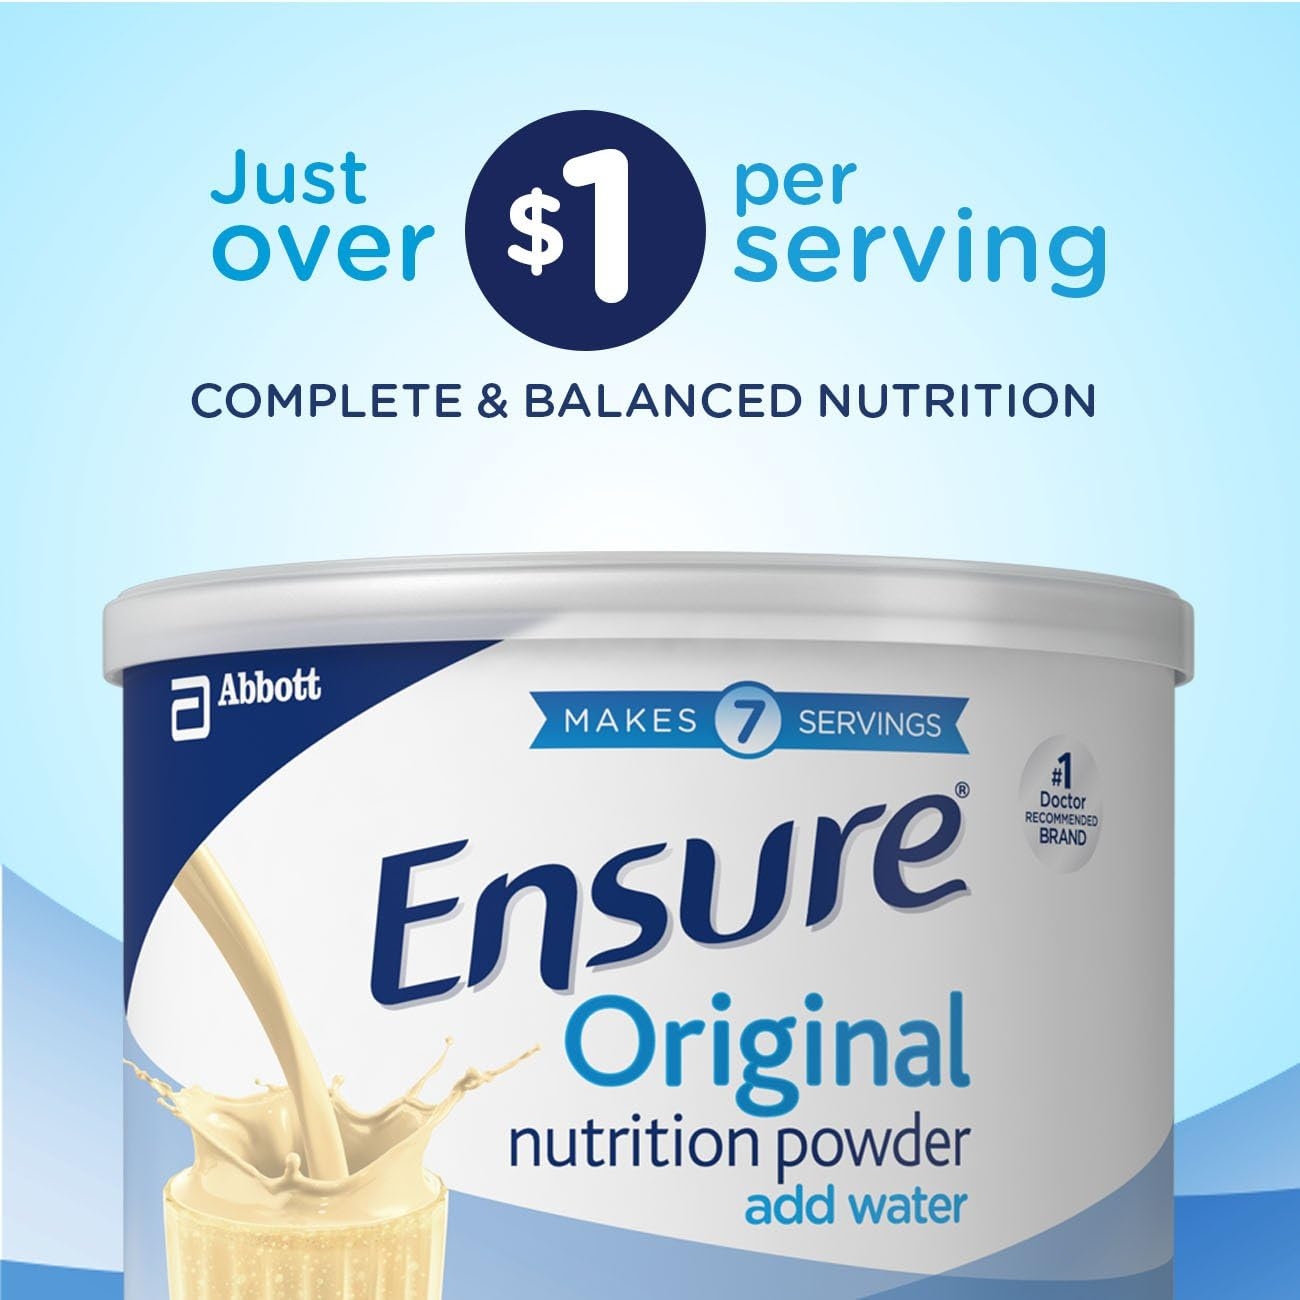 Ensure Original Nutrition Shake Powder with 9 grams of protein, Meal Replacement Shakes, Vanilla, 14 oz, 6 Count